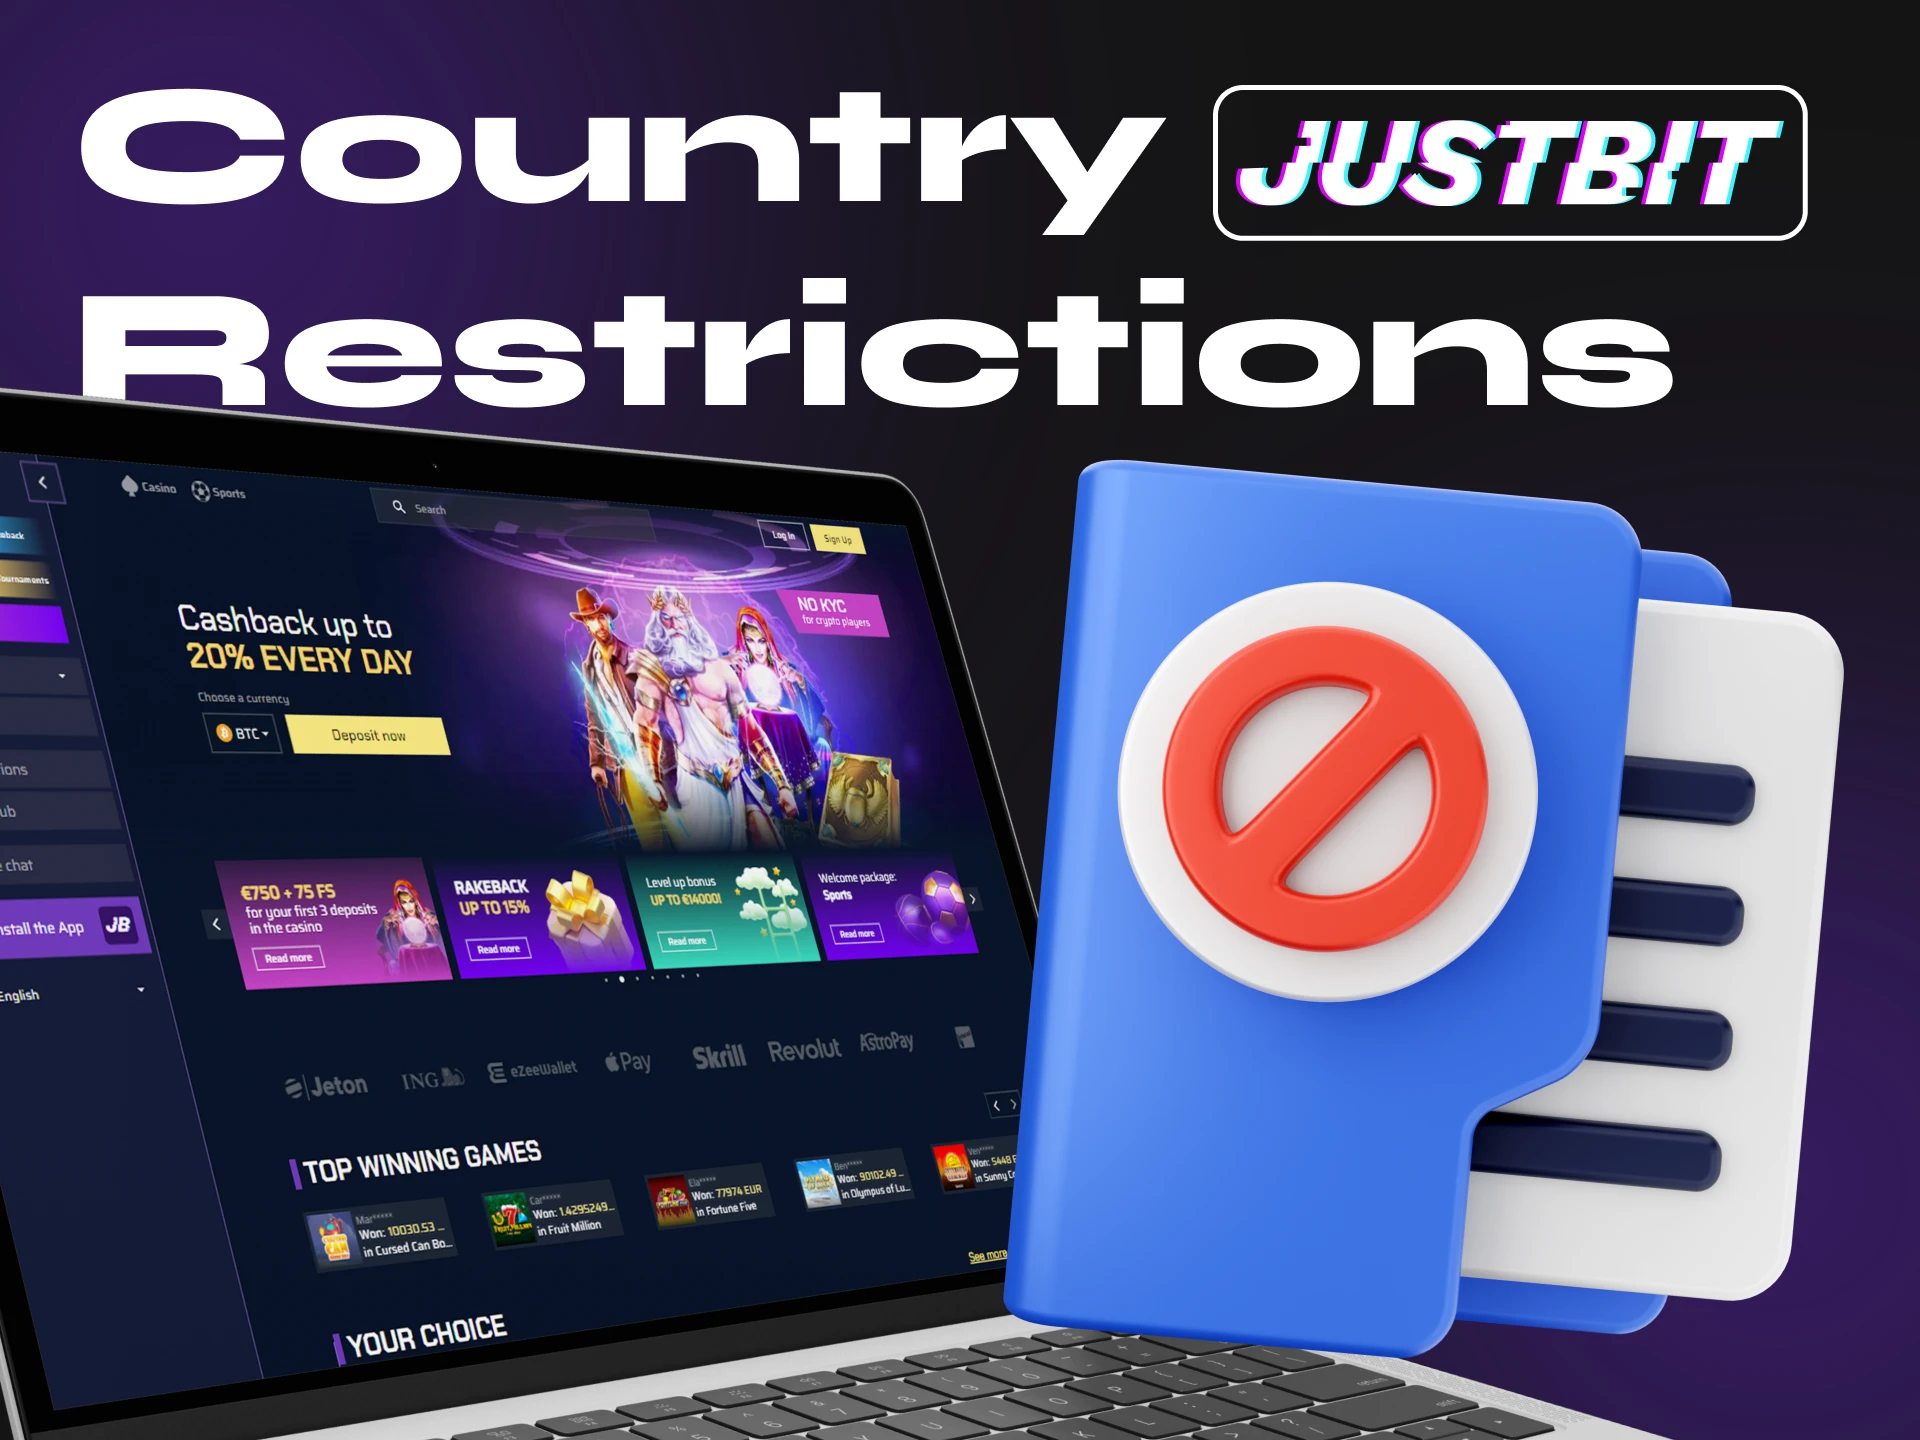 Residents of these countries cannot play at Justbit Casino.